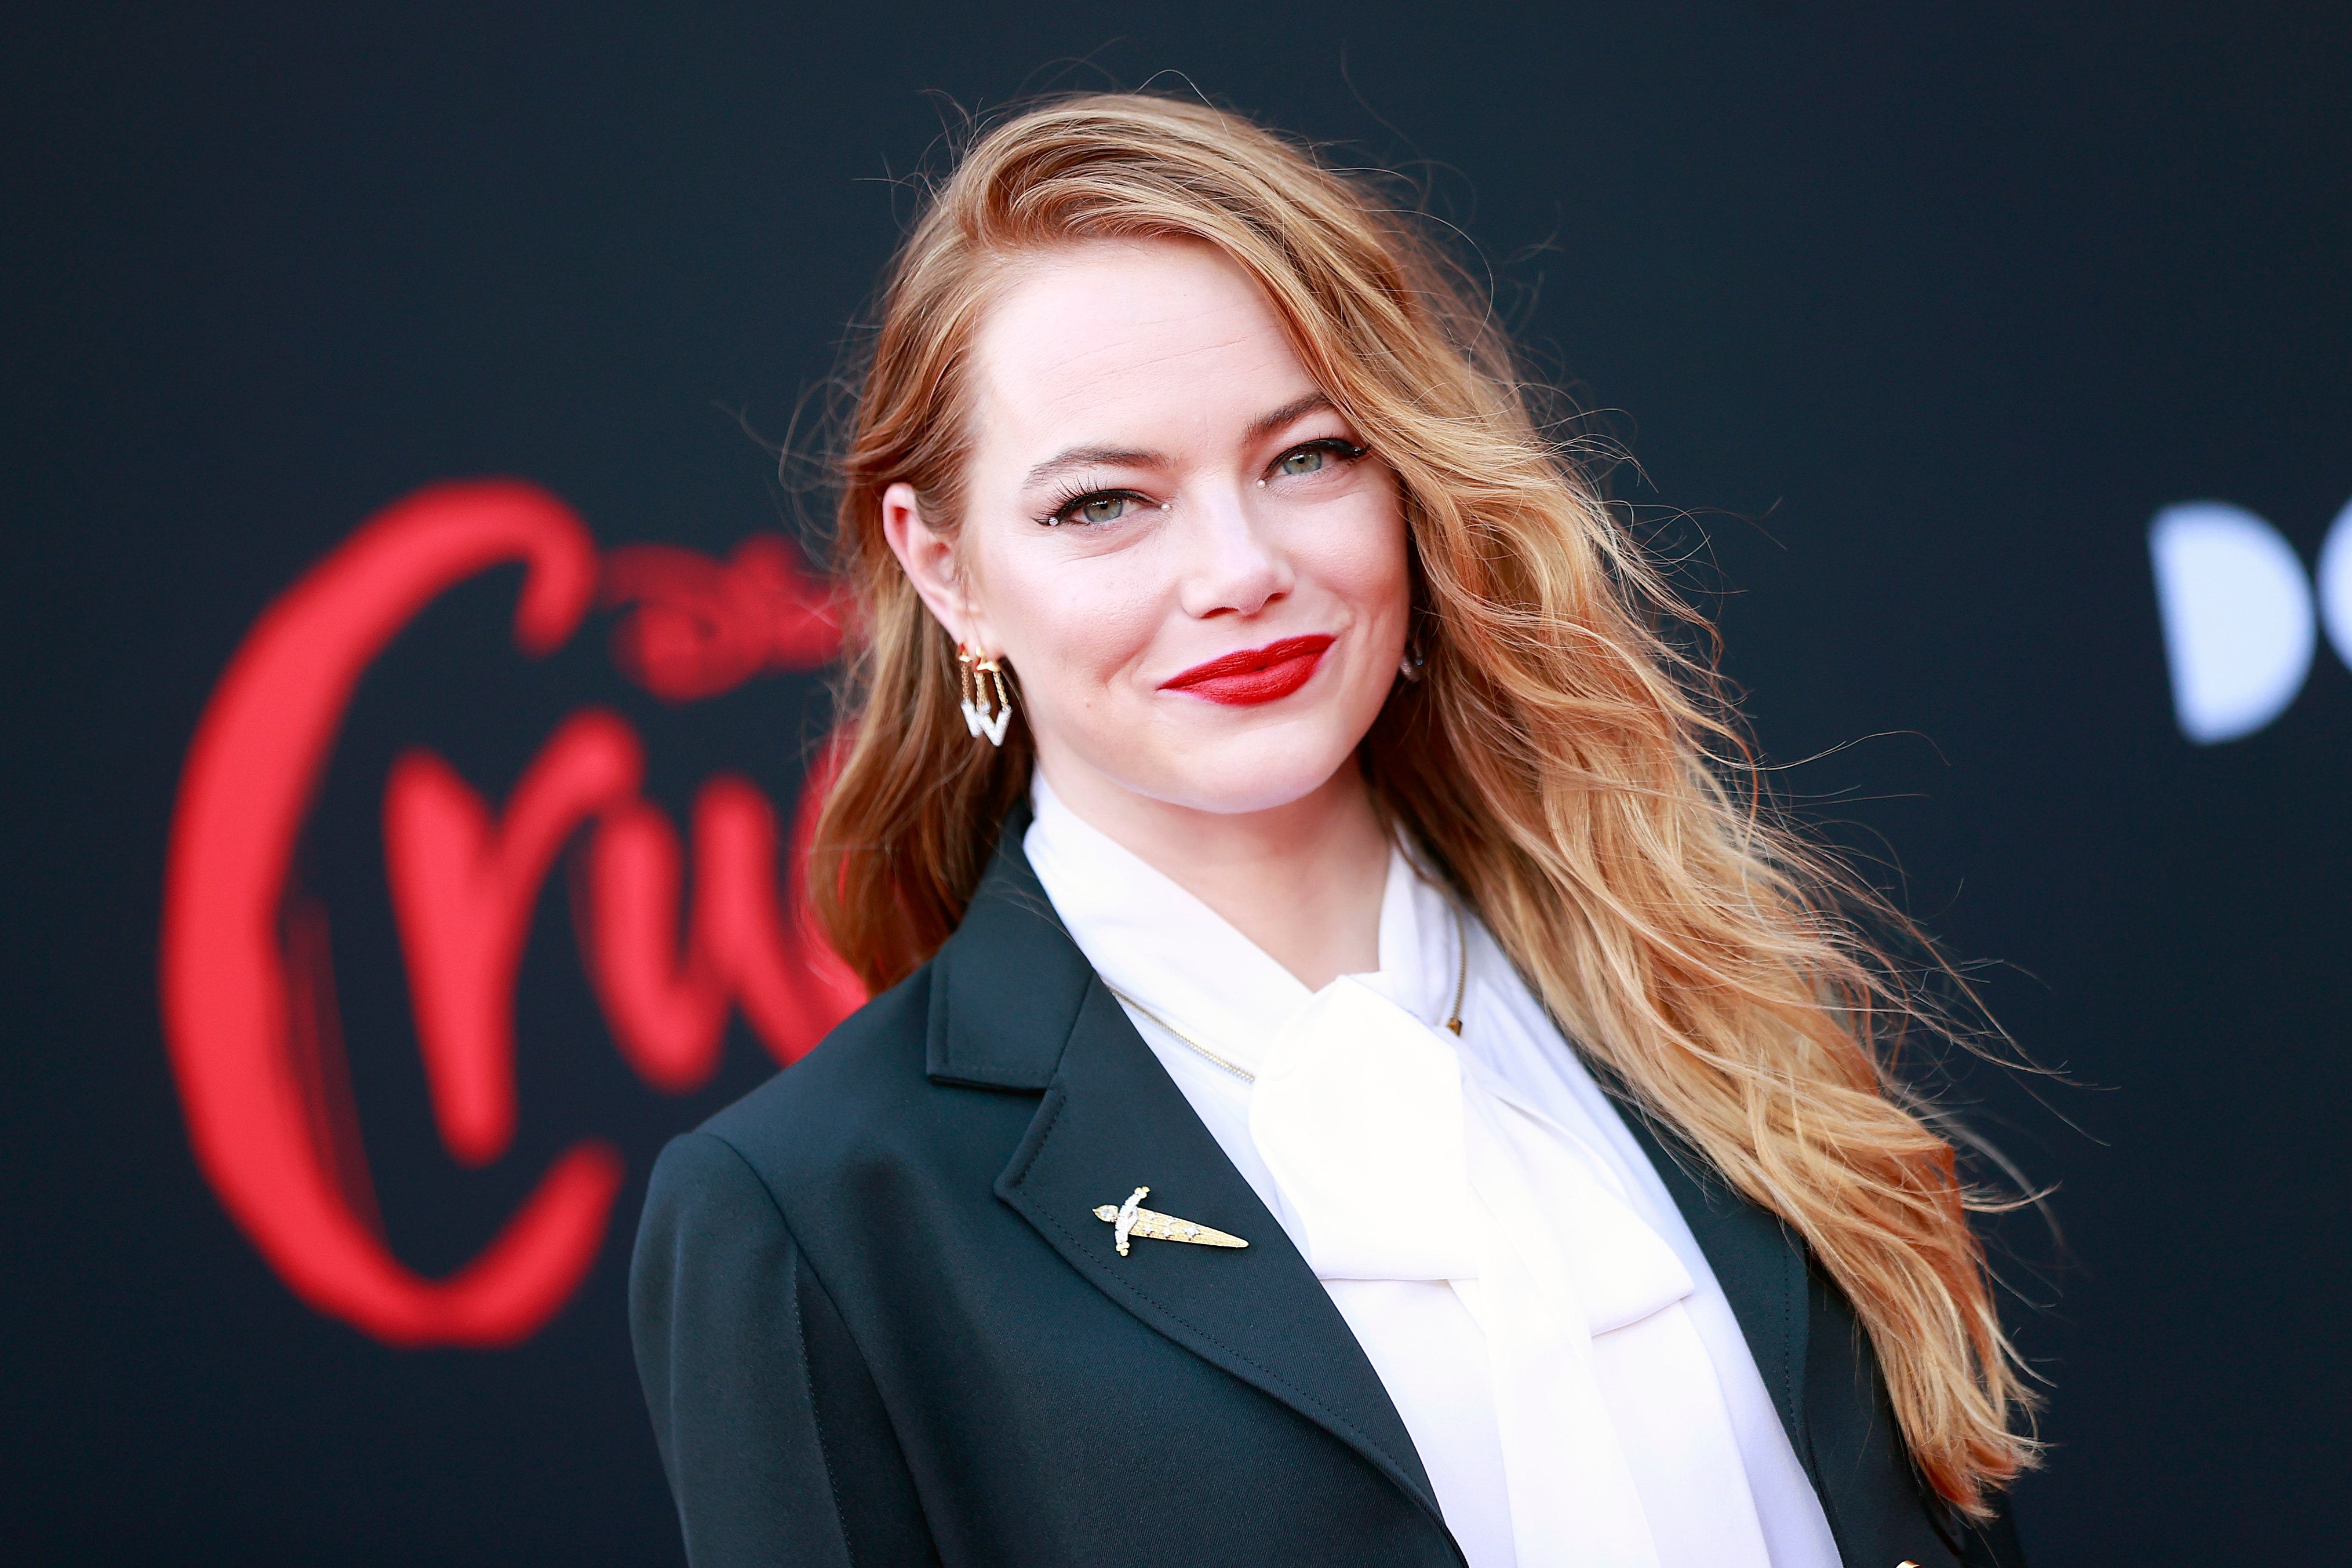 Pregnant Emma Stone Heads Out With Husband Dave McCary After Big 'Cruella'  Trailer Debut: Photo 4527797, Dave McCary, Emma Stone, Pregnant  Celebrities Photos